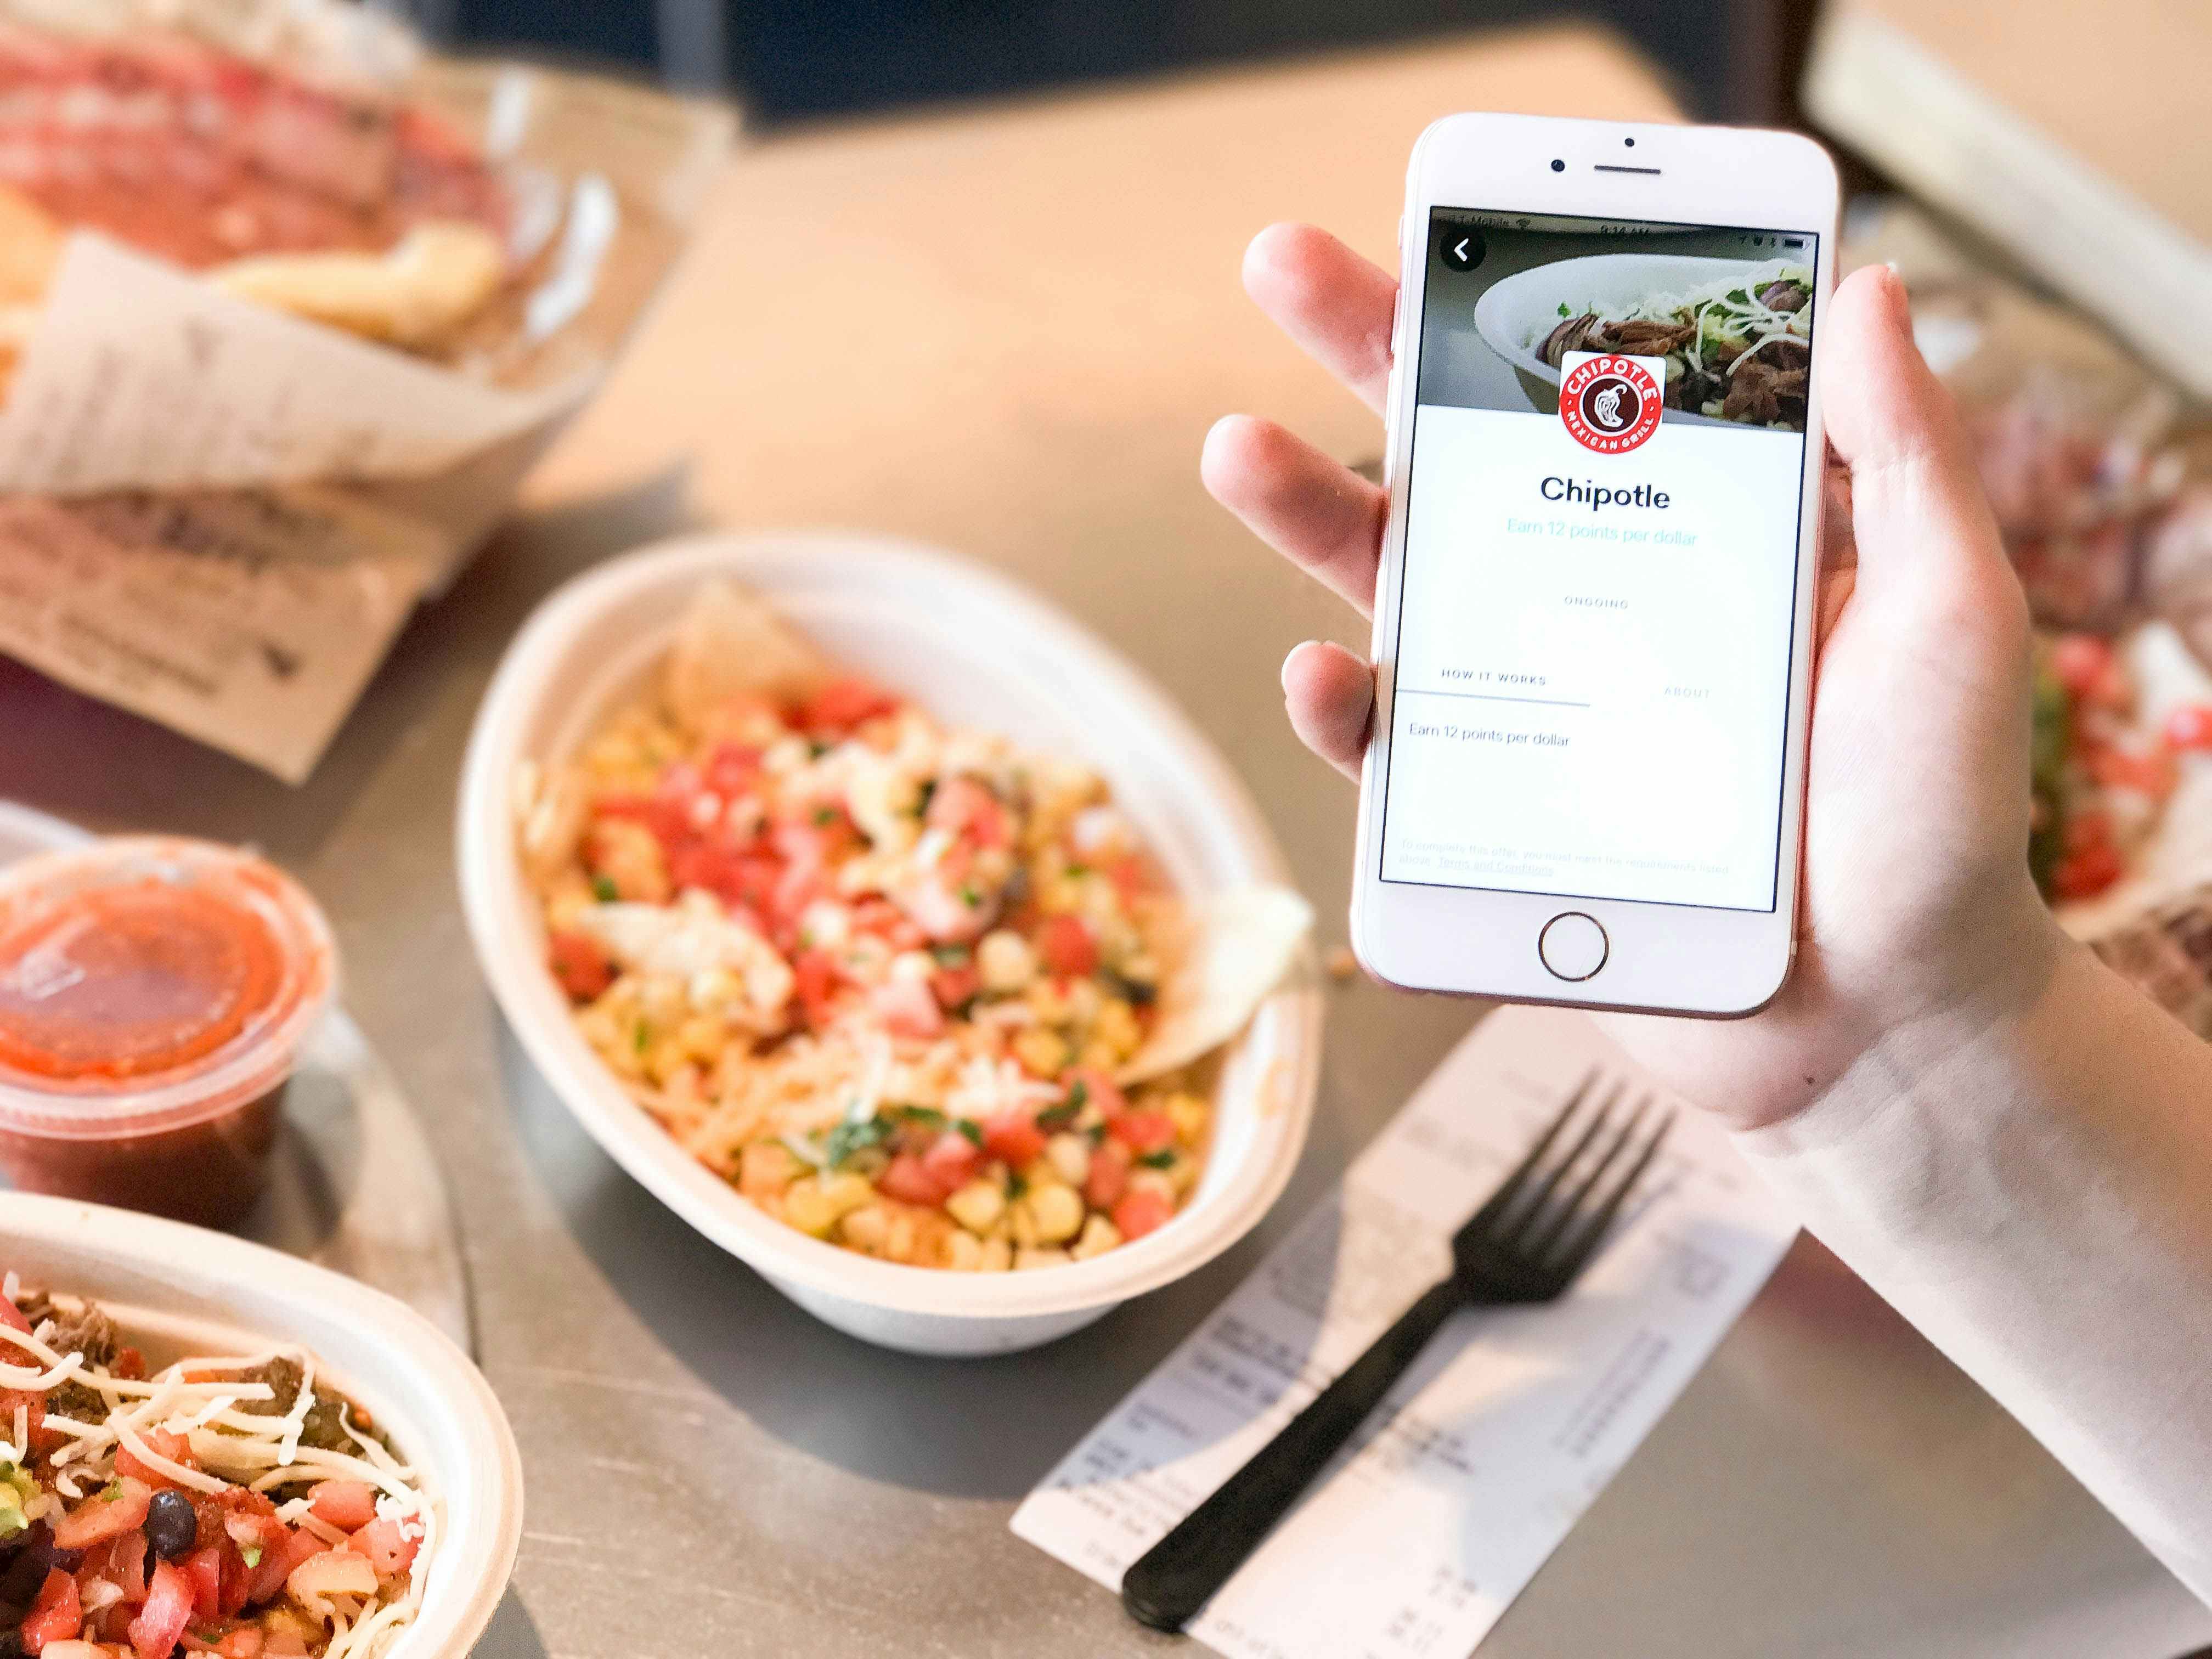 Earn free entrees at Chipotle Mexican Grill with the Chipotle app.